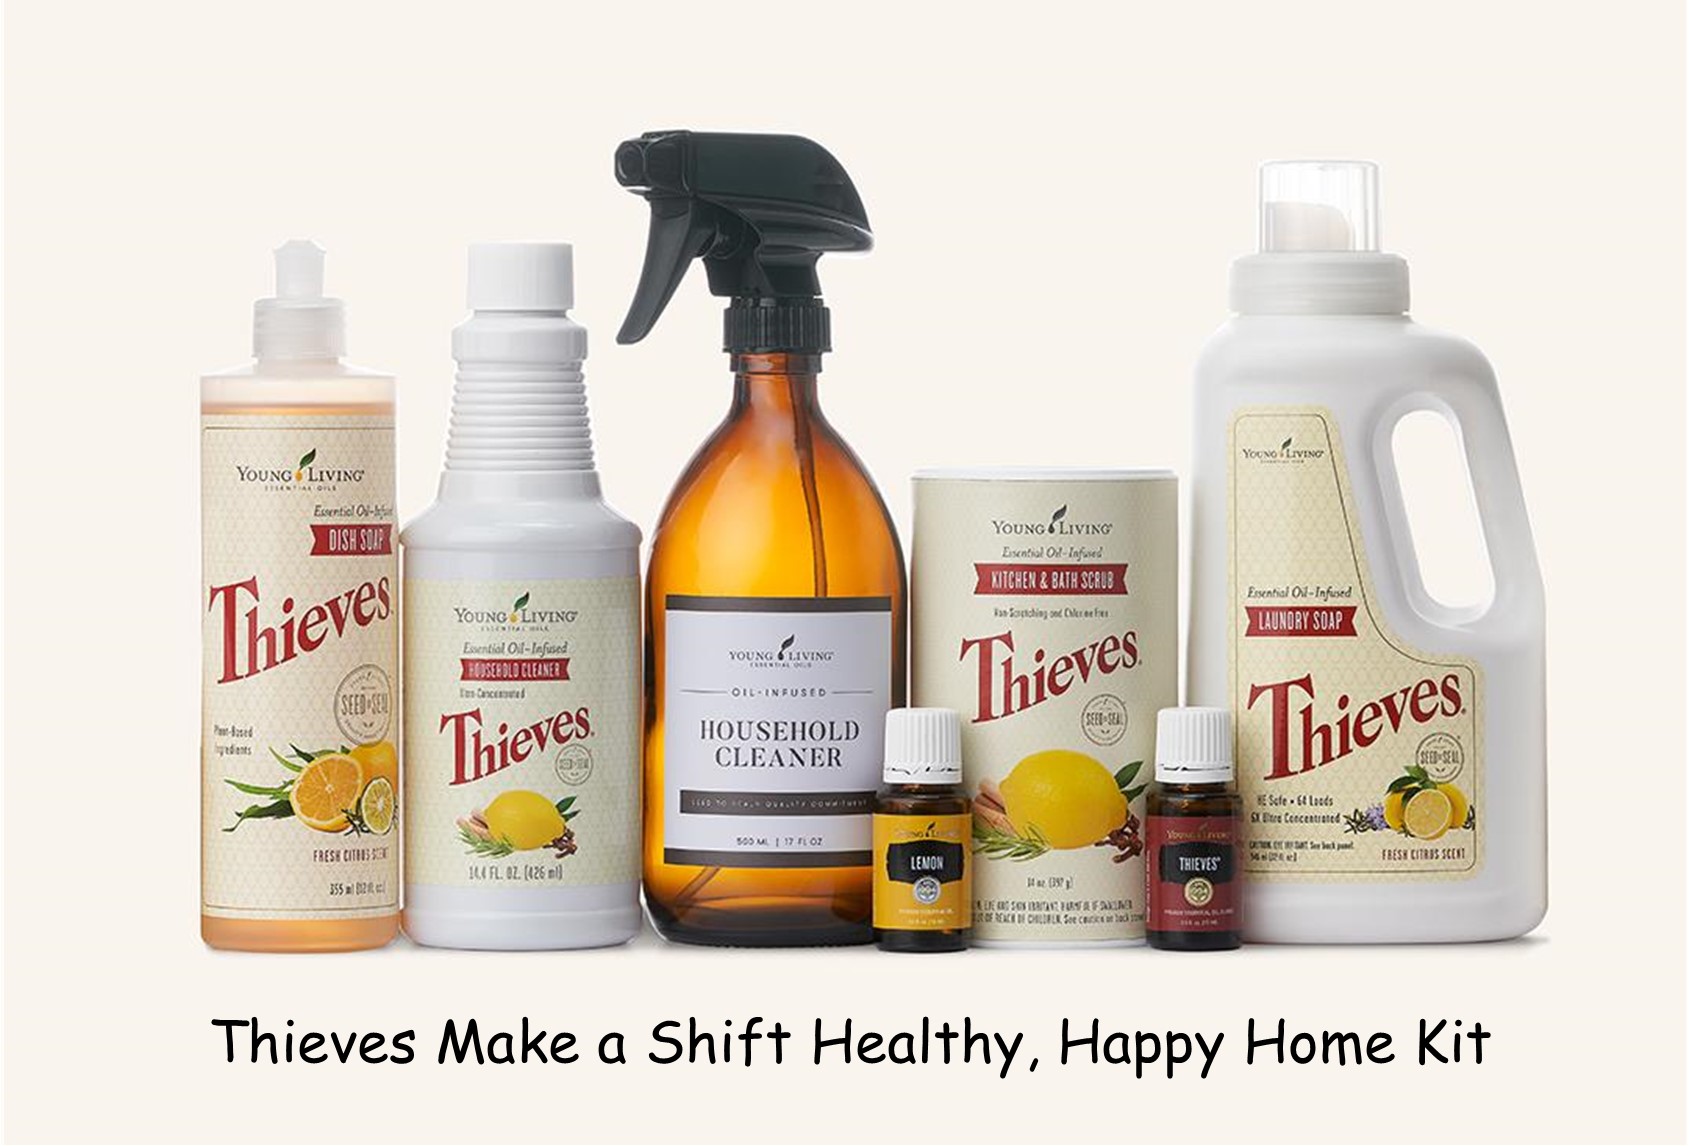 Thieves Productline